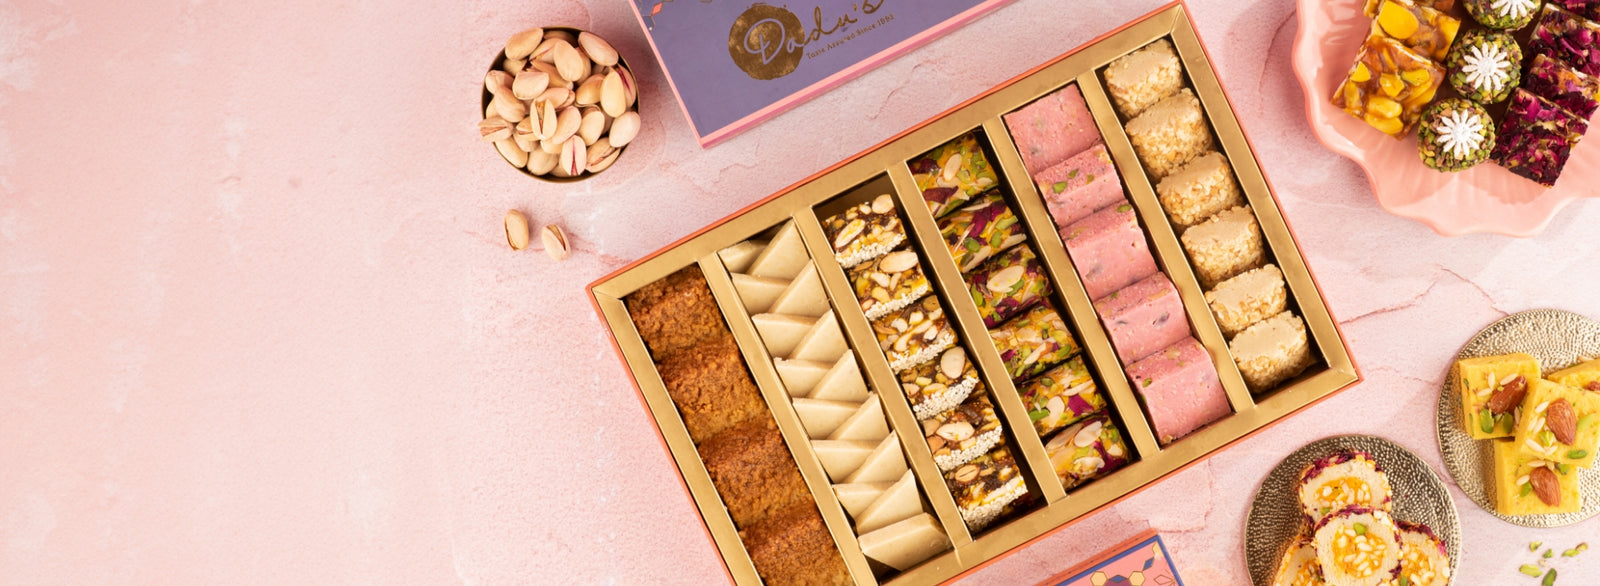 Assorted Sweets Boxes